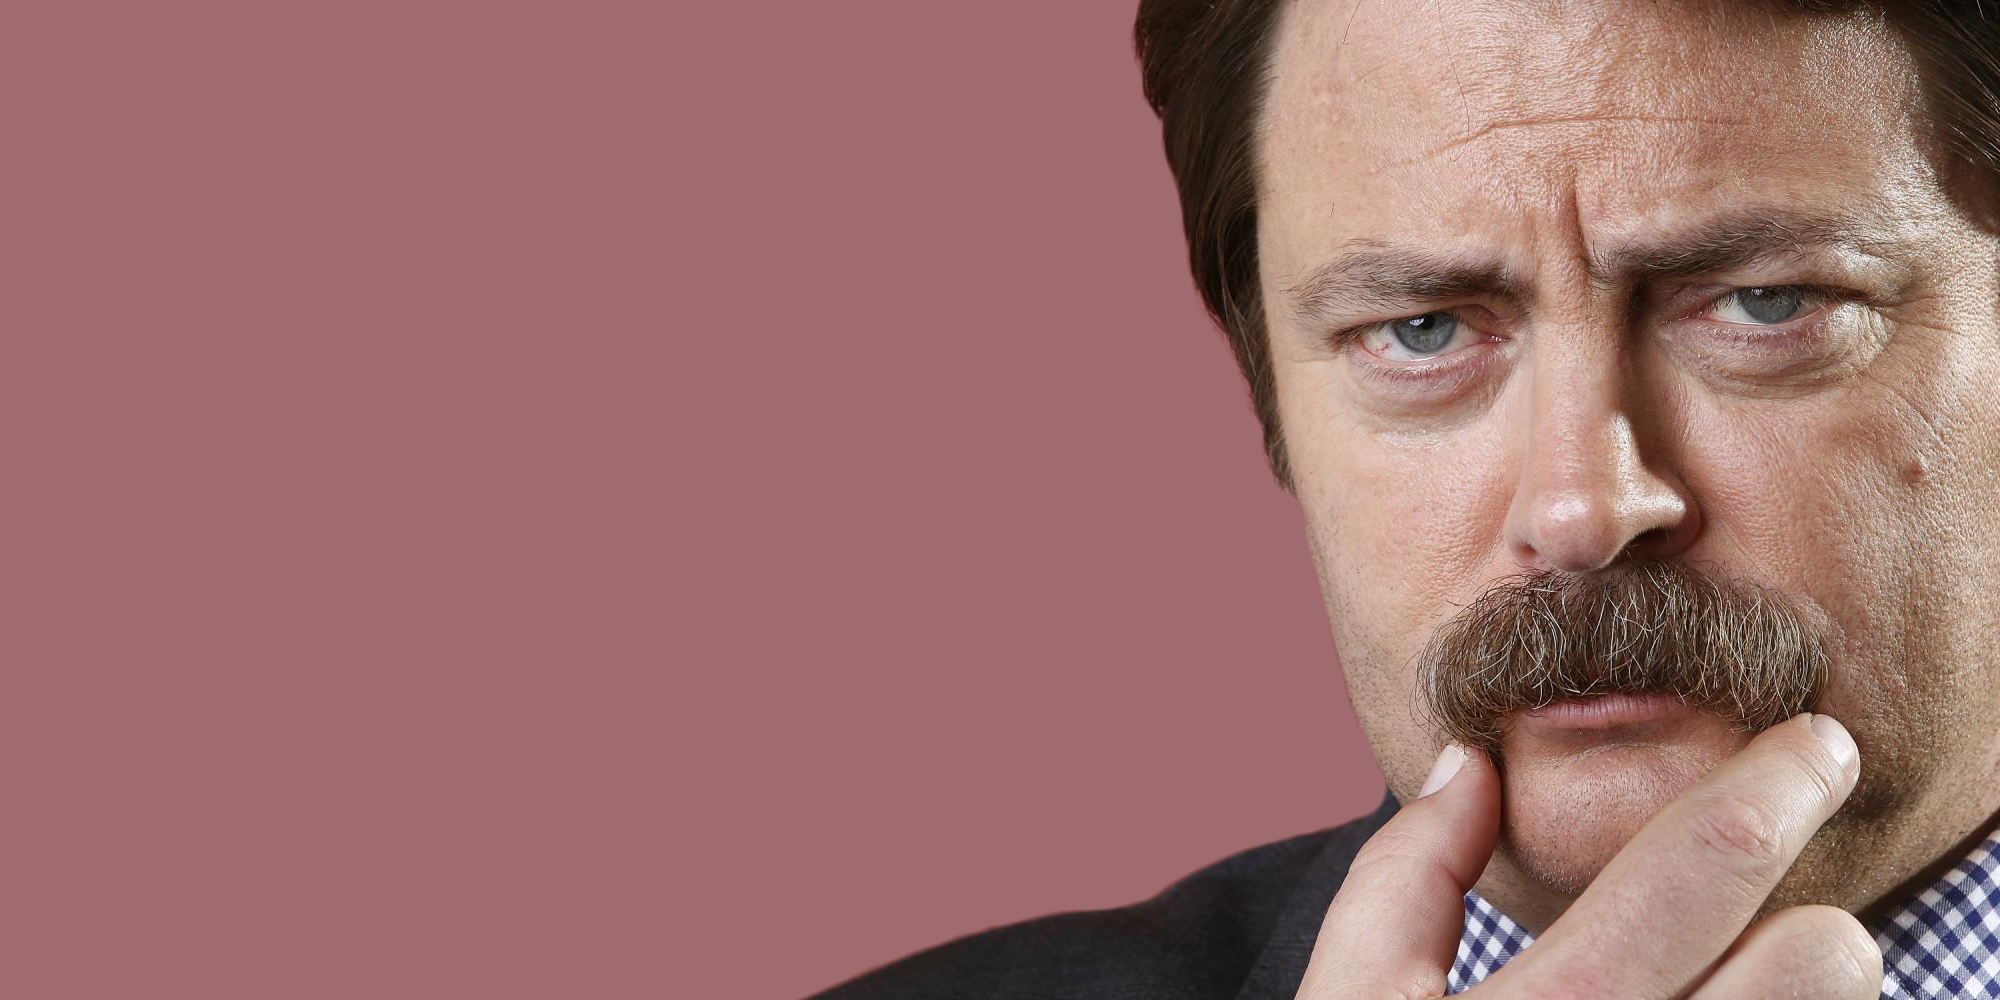 Ron Swanson - Solid background with Ron Swanson